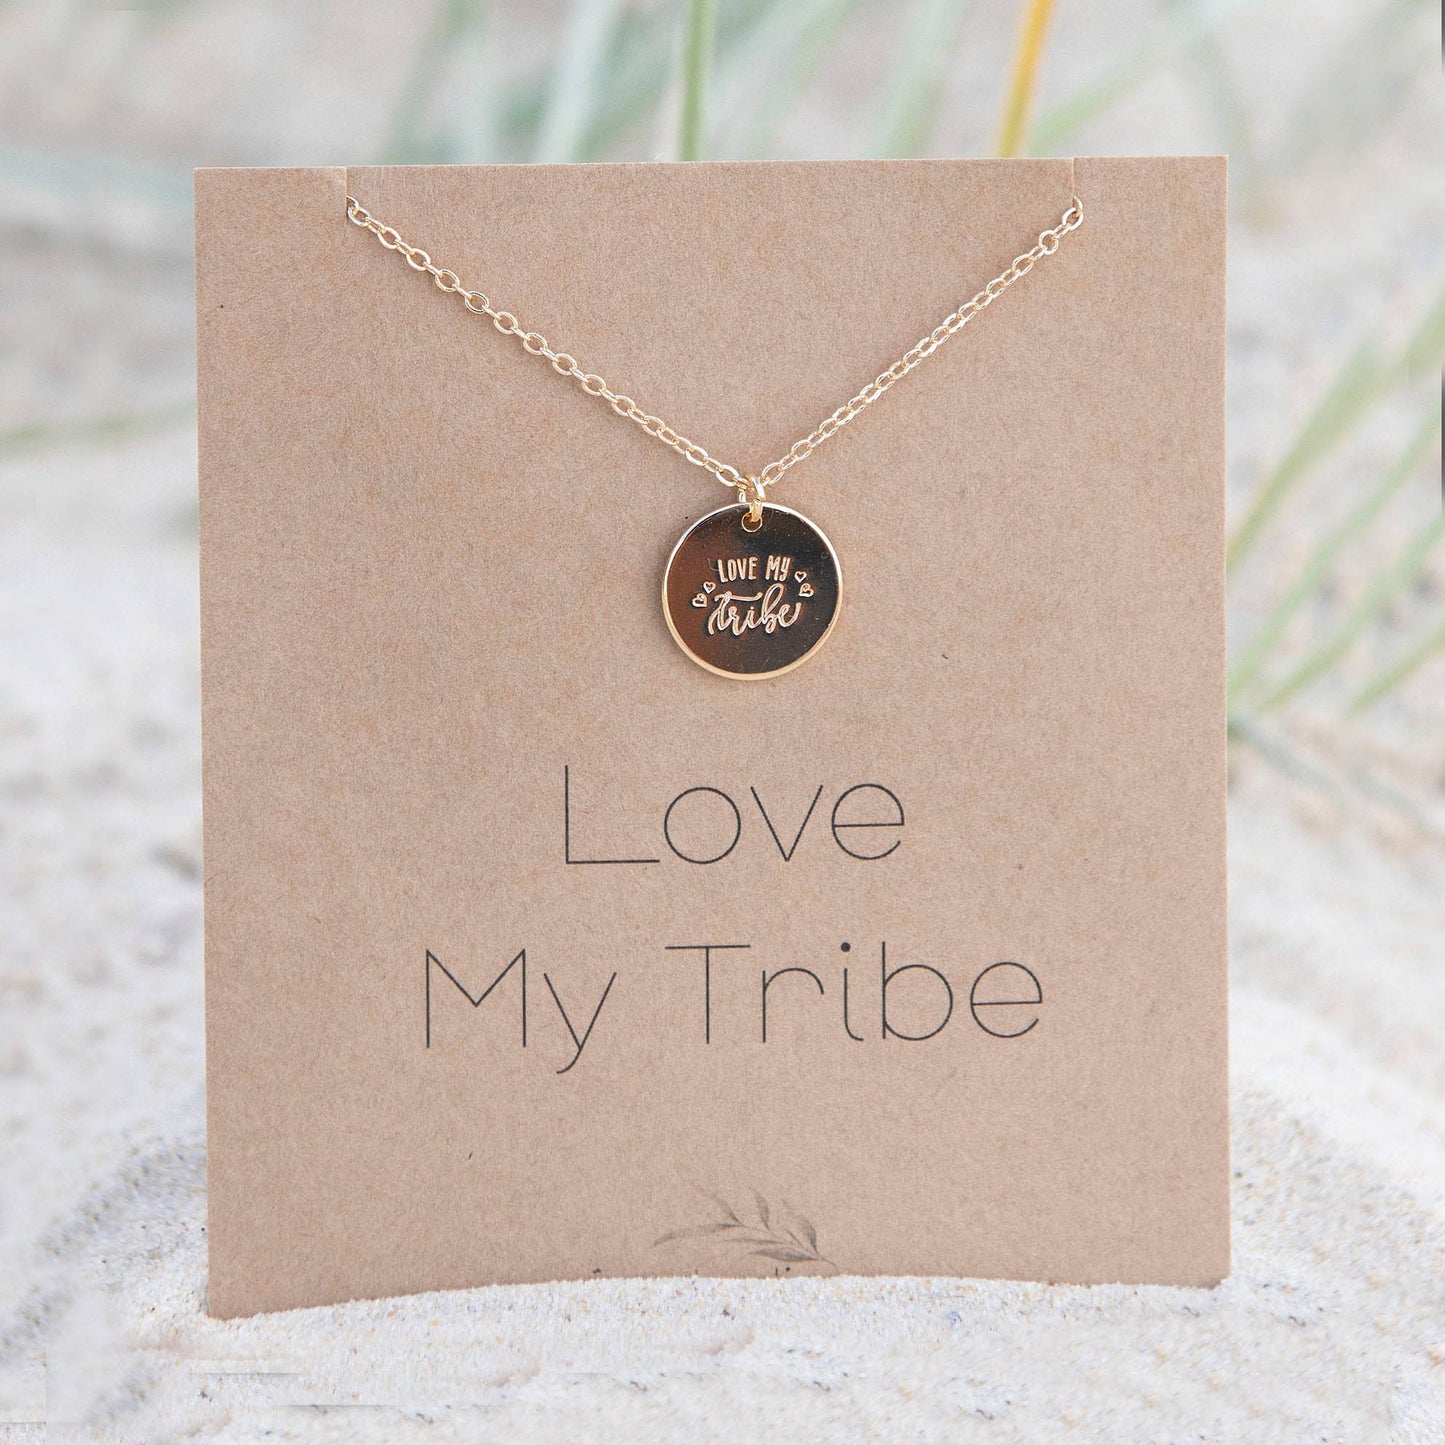 Love My Tribe Pendant Necklace